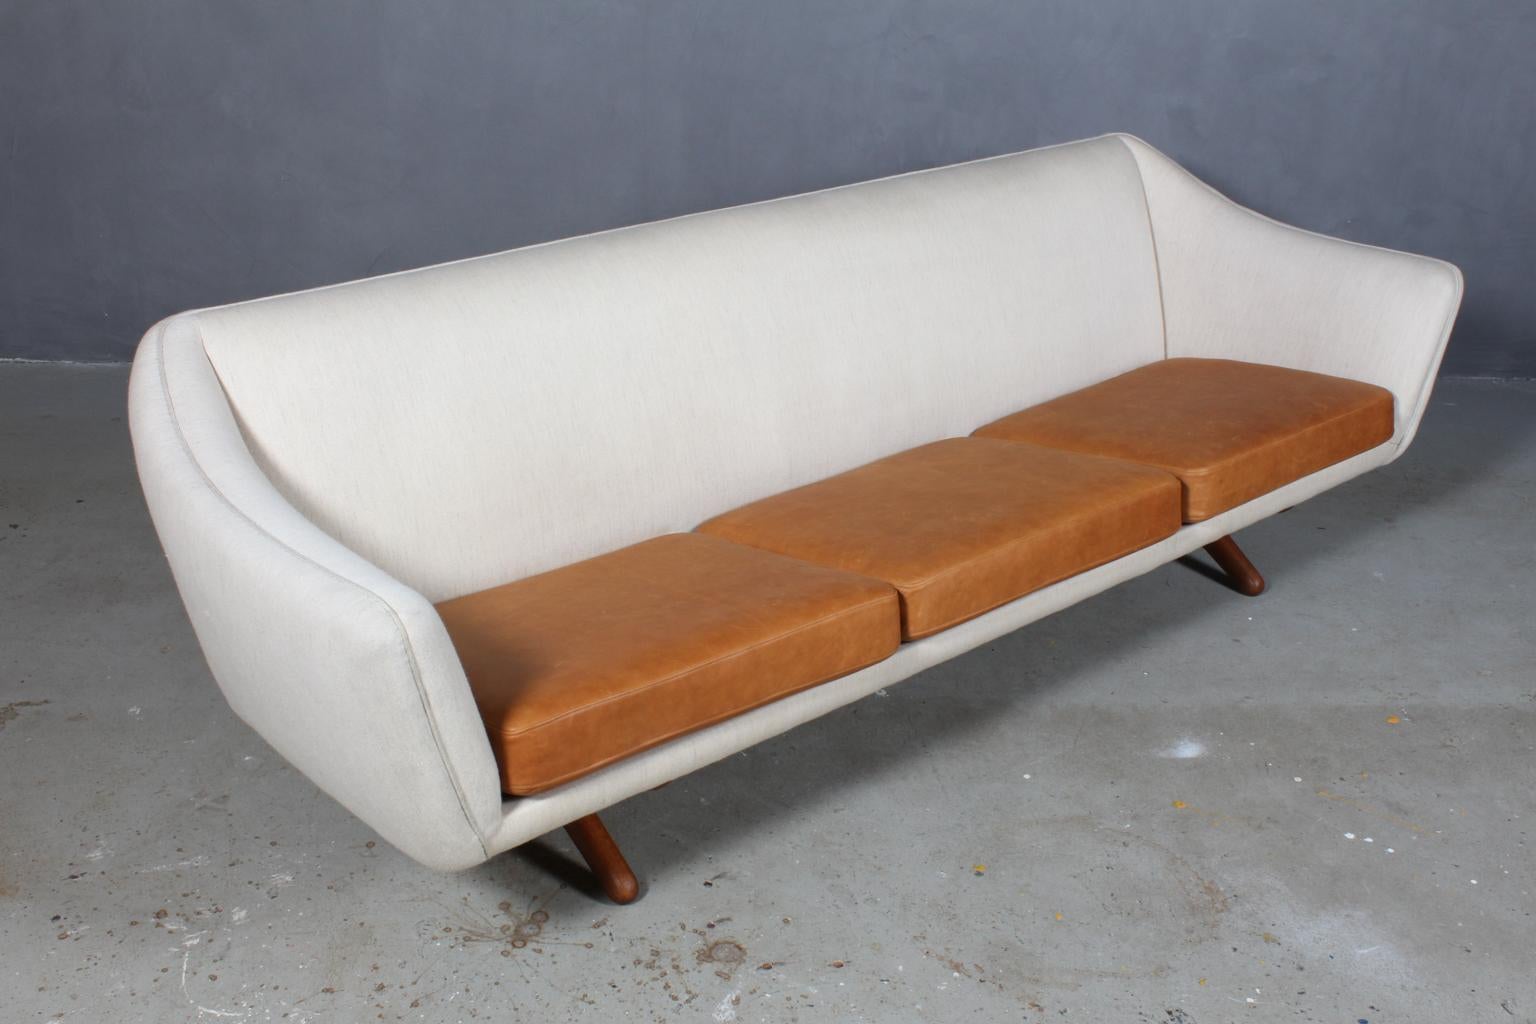 Illum Wikkelsø three-seat sofa in light wool and new upholstered cushions in tan vintage aniline leather.

Legs in teak.

Model ML 140, made by Mikael Laursen, Denmark, 1960s.